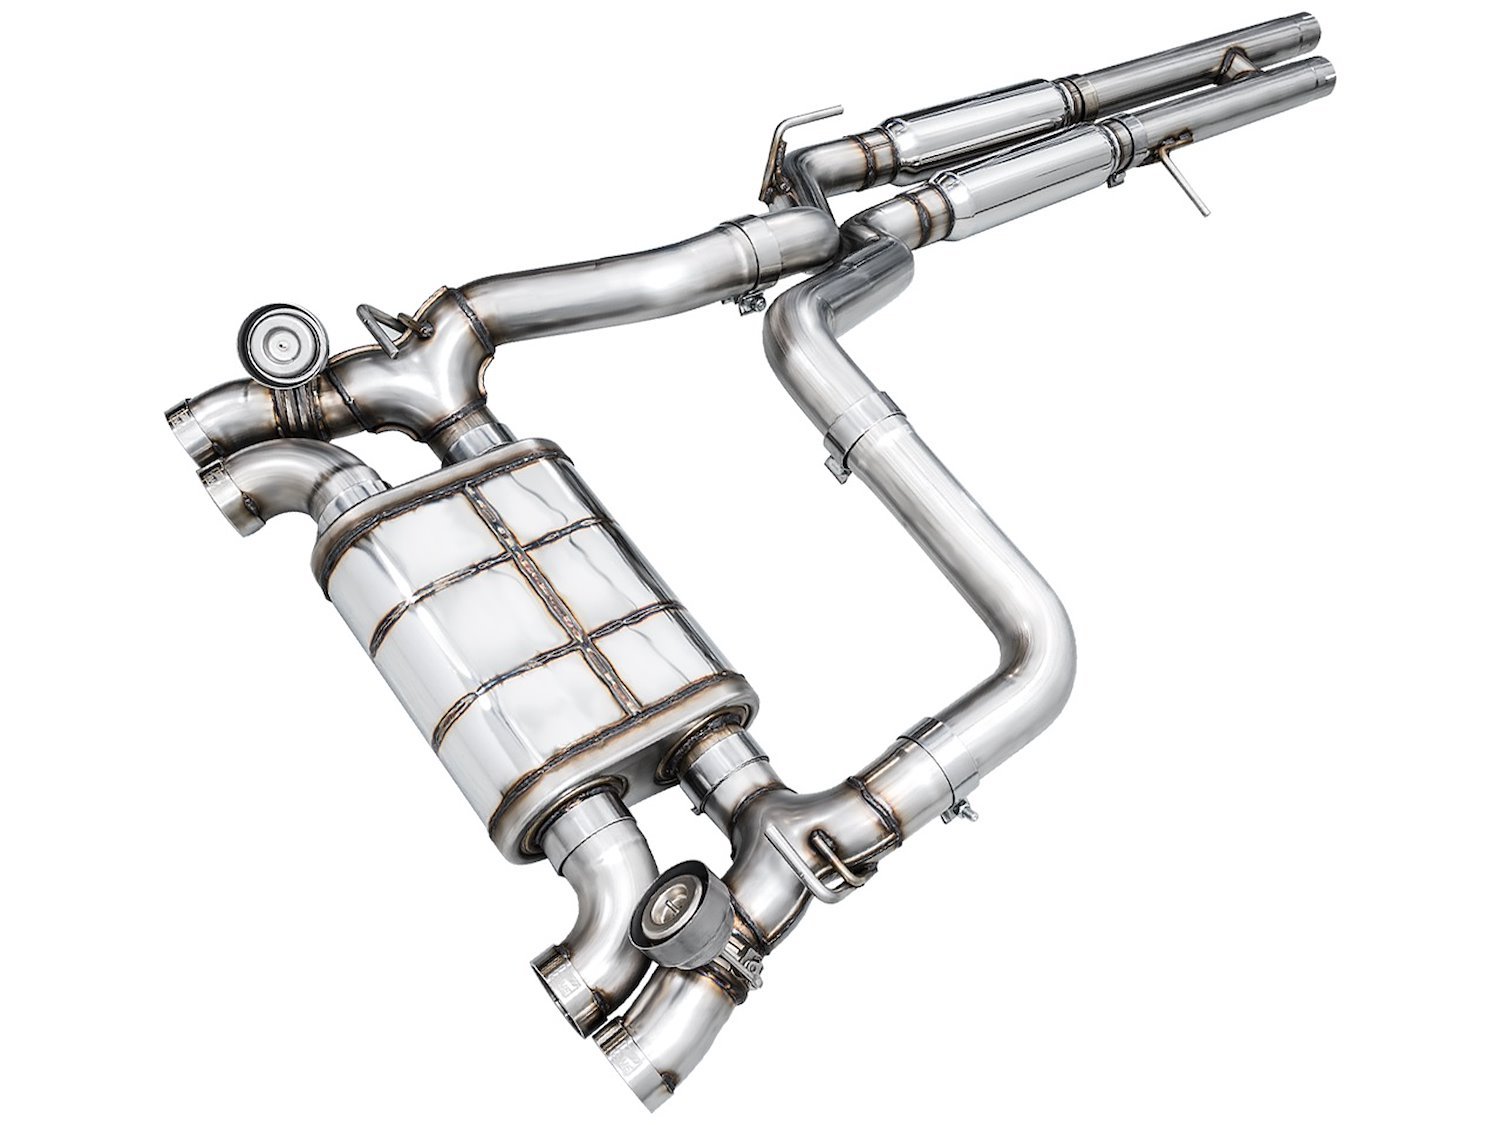 3025-41392 SwitchPath Cat-Back Exhaust System Fits Jeep Wrangler JL Unlimited Rubicon w/6.4L V8 392 Engine